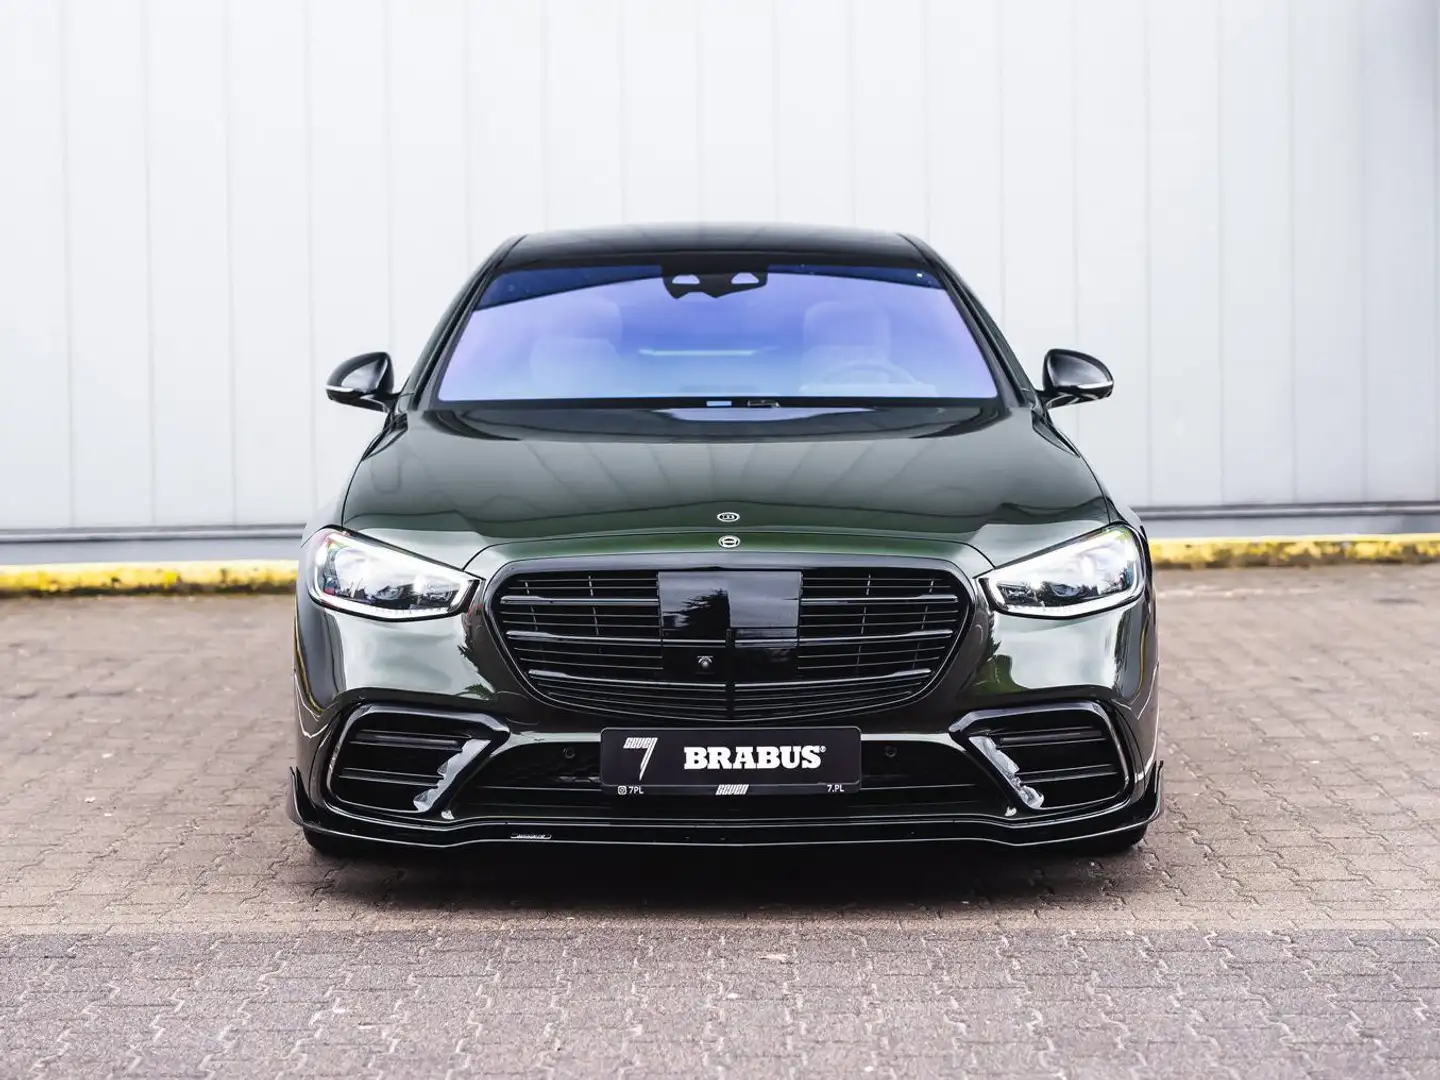 Mercedes-Benz S 580 Full Option BRABUS, Unique paint, in Stock Green - 2